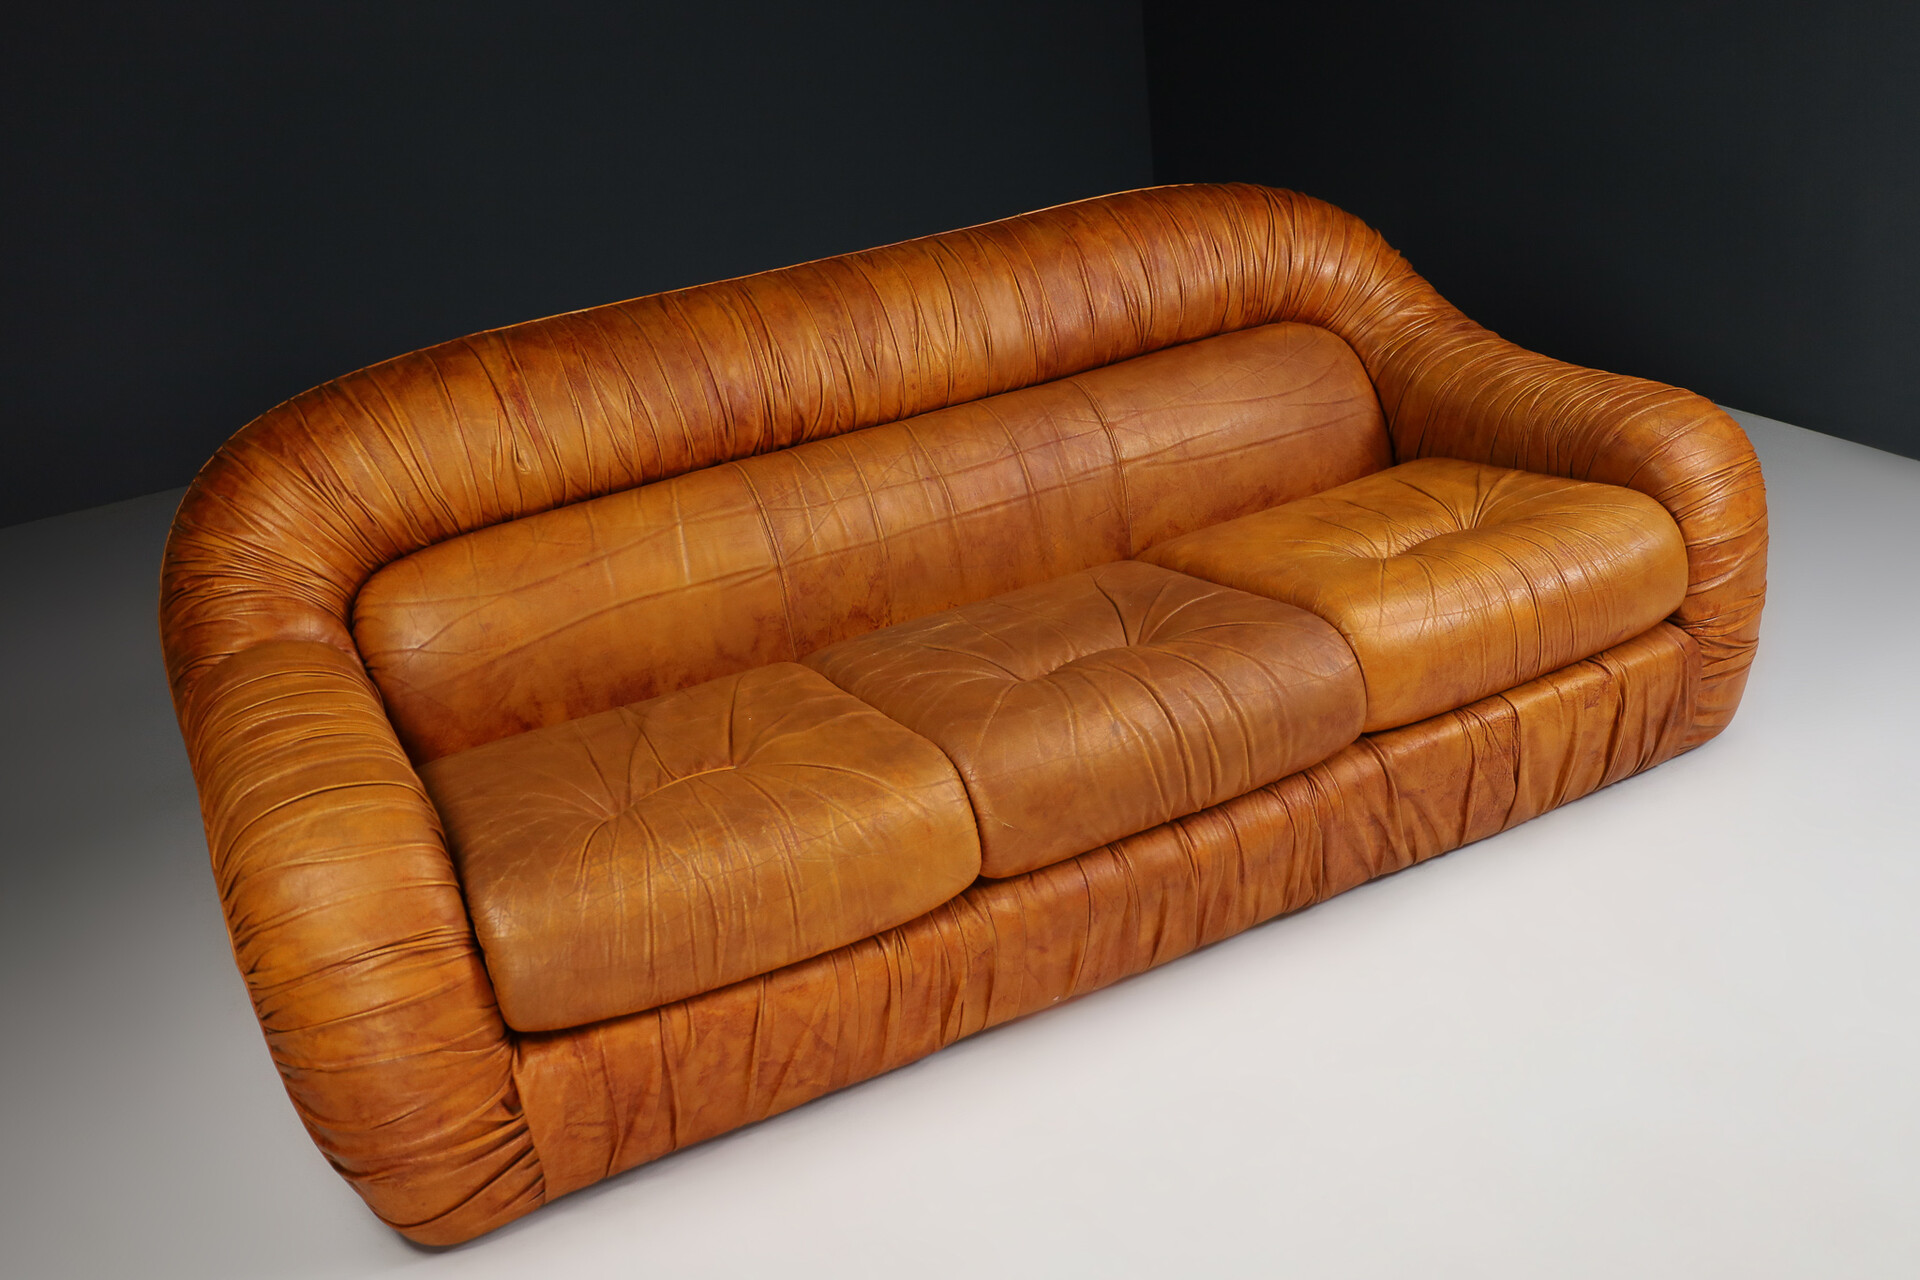 Mid - \'Capriccio\' Eurosalotto, for Sofas George Seating - Late-20th Italy and brown in Lounge Davidowski century sofa leather, model century Benches Bighinello designed - original by modern 1970s